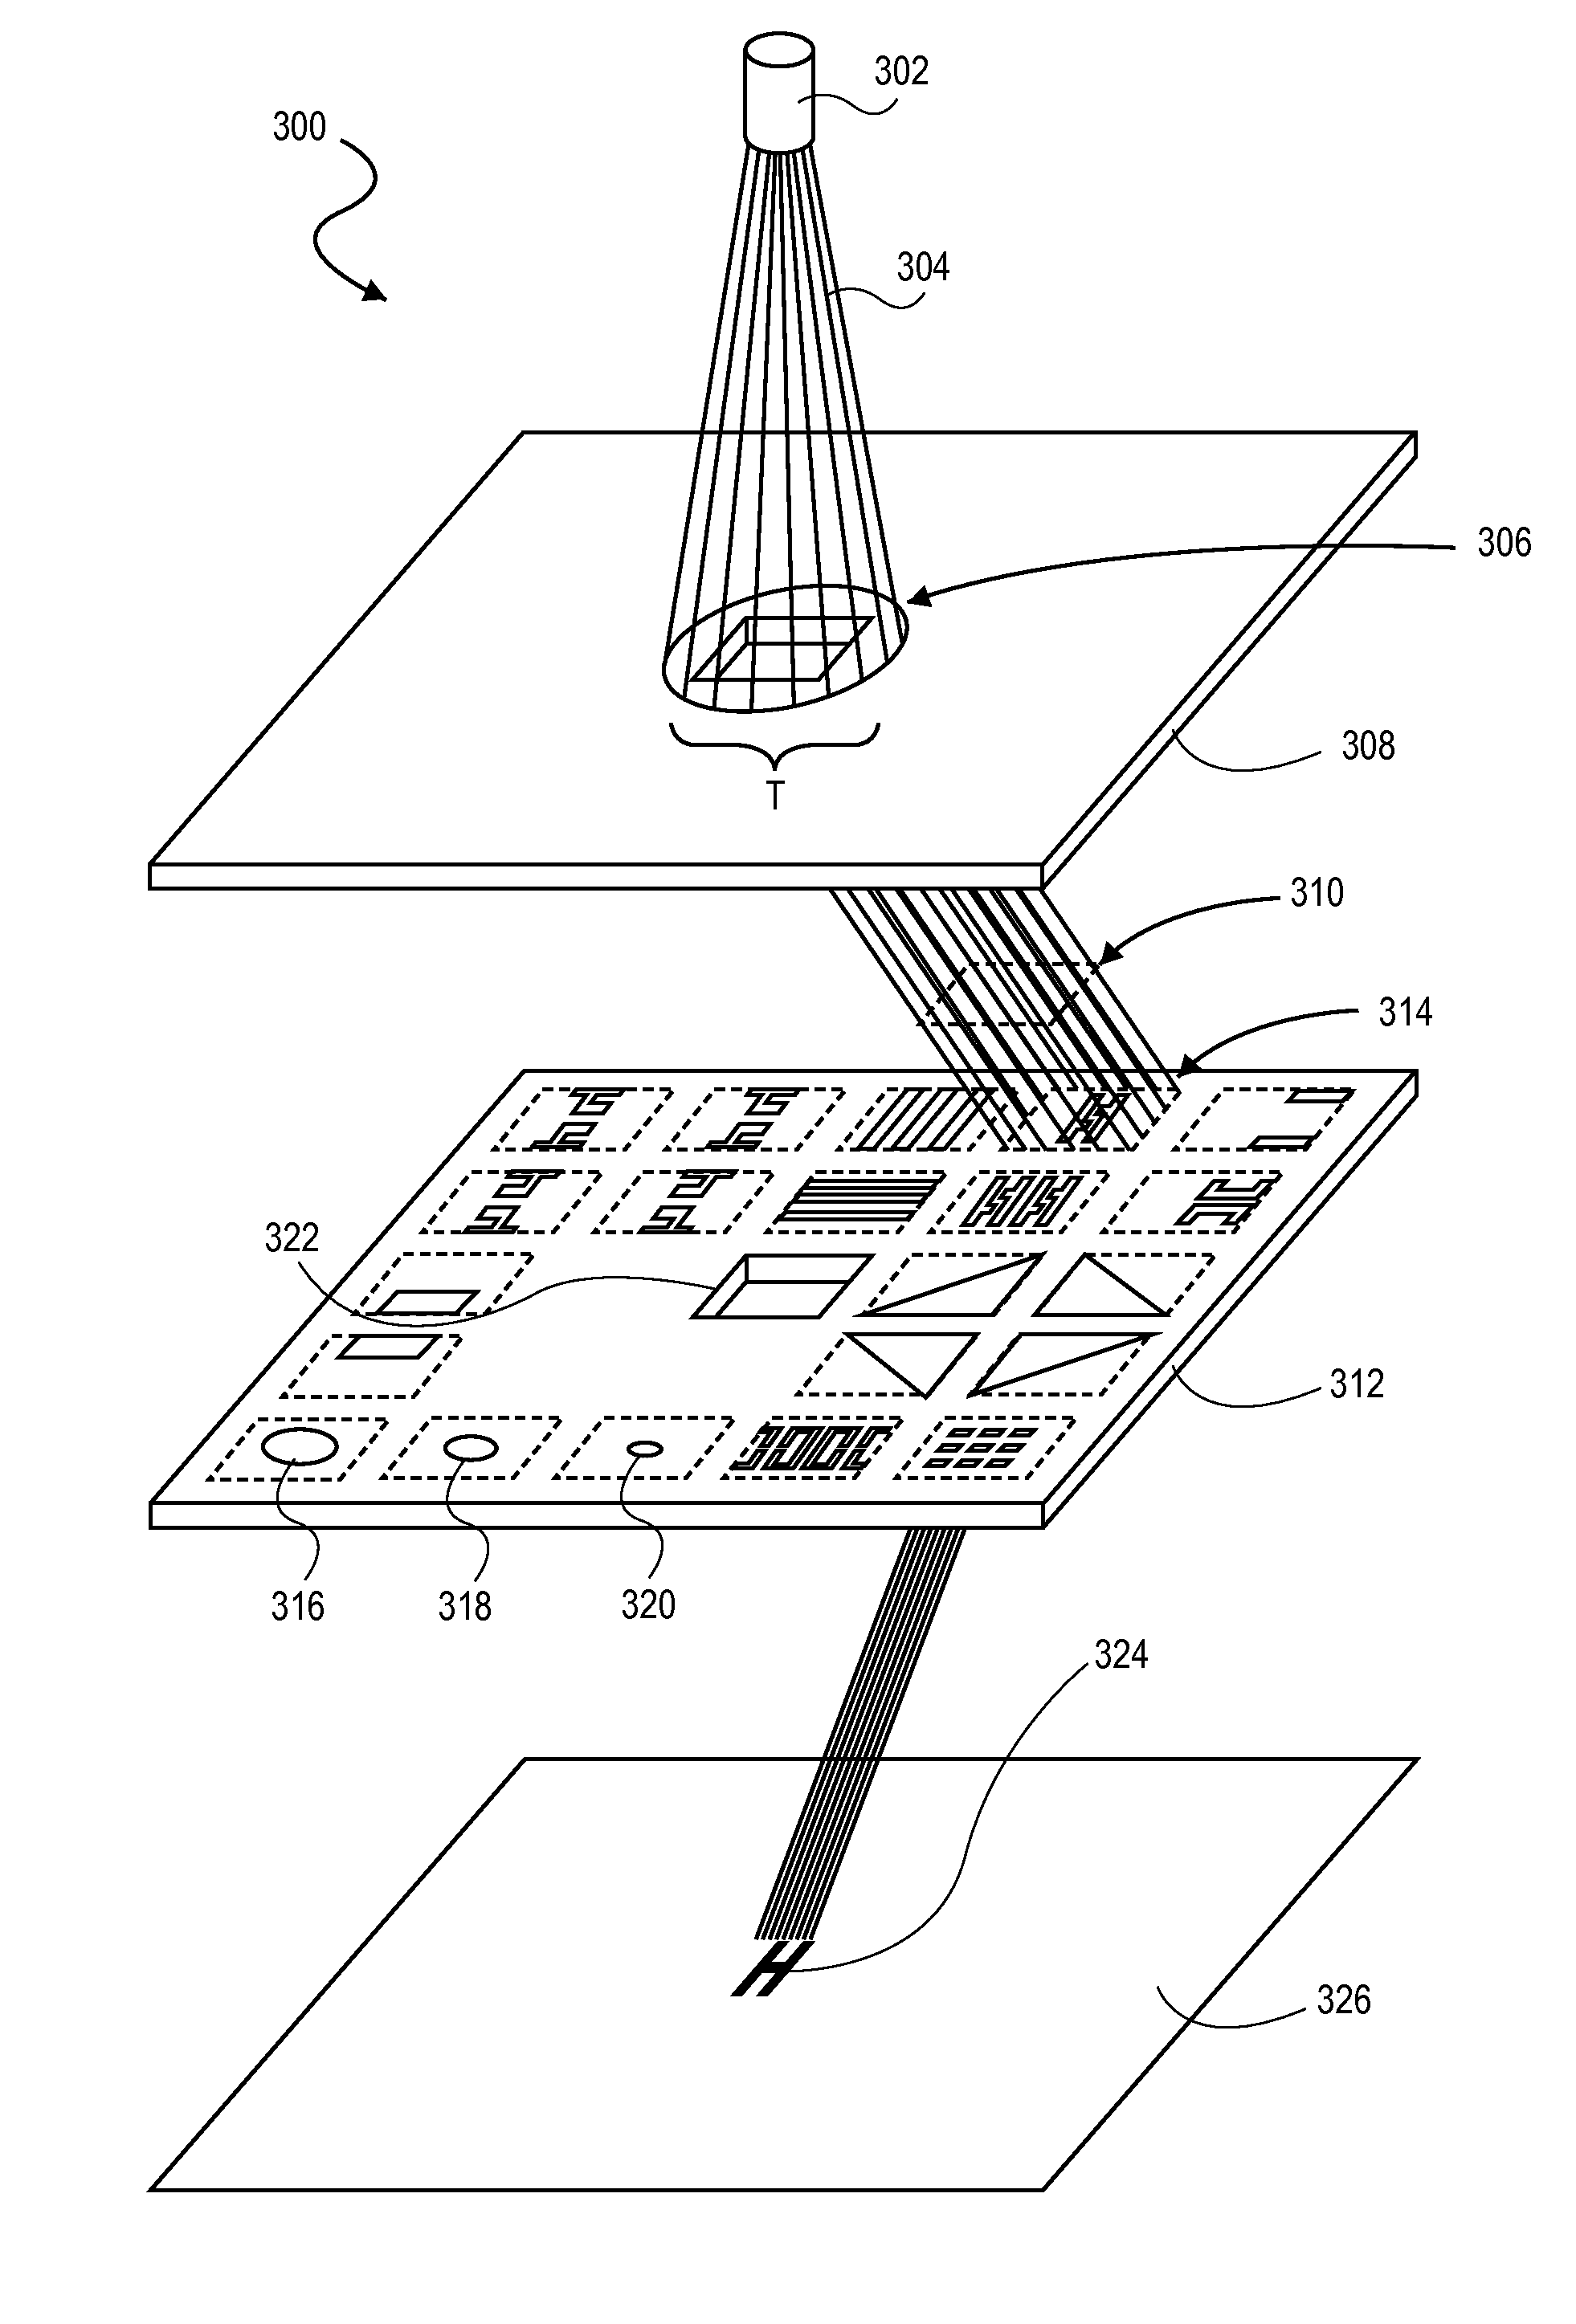 Method for fracturing circular patterns and for manufacturing a semiconductor device